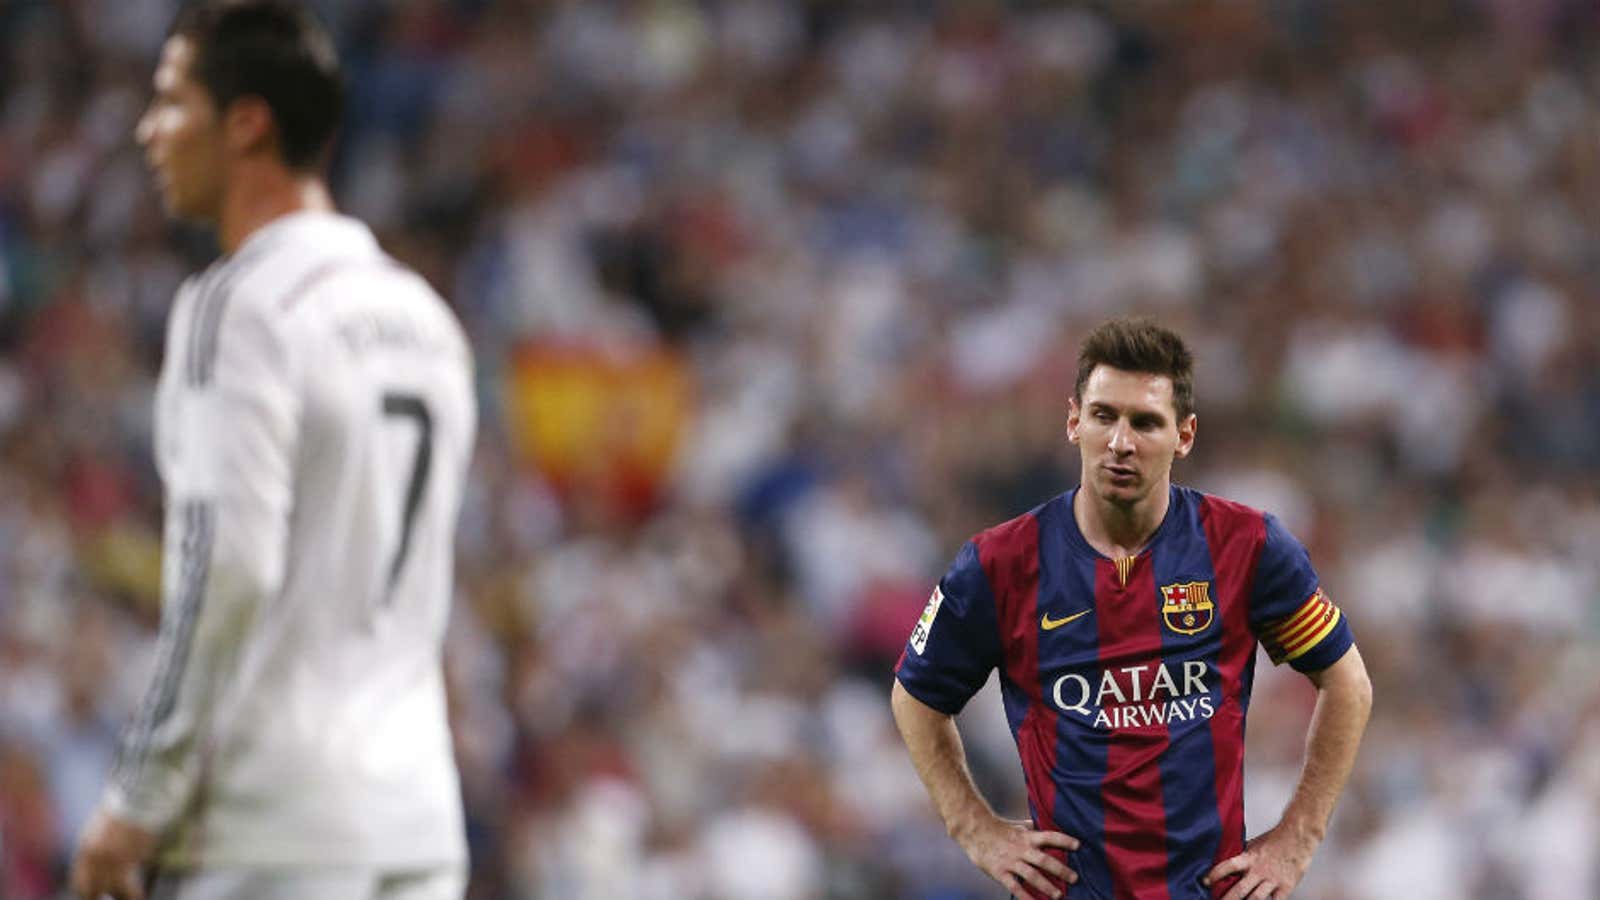 Lionel Messi and Cristiano Ronaldo have the heftiest price tags on the list.